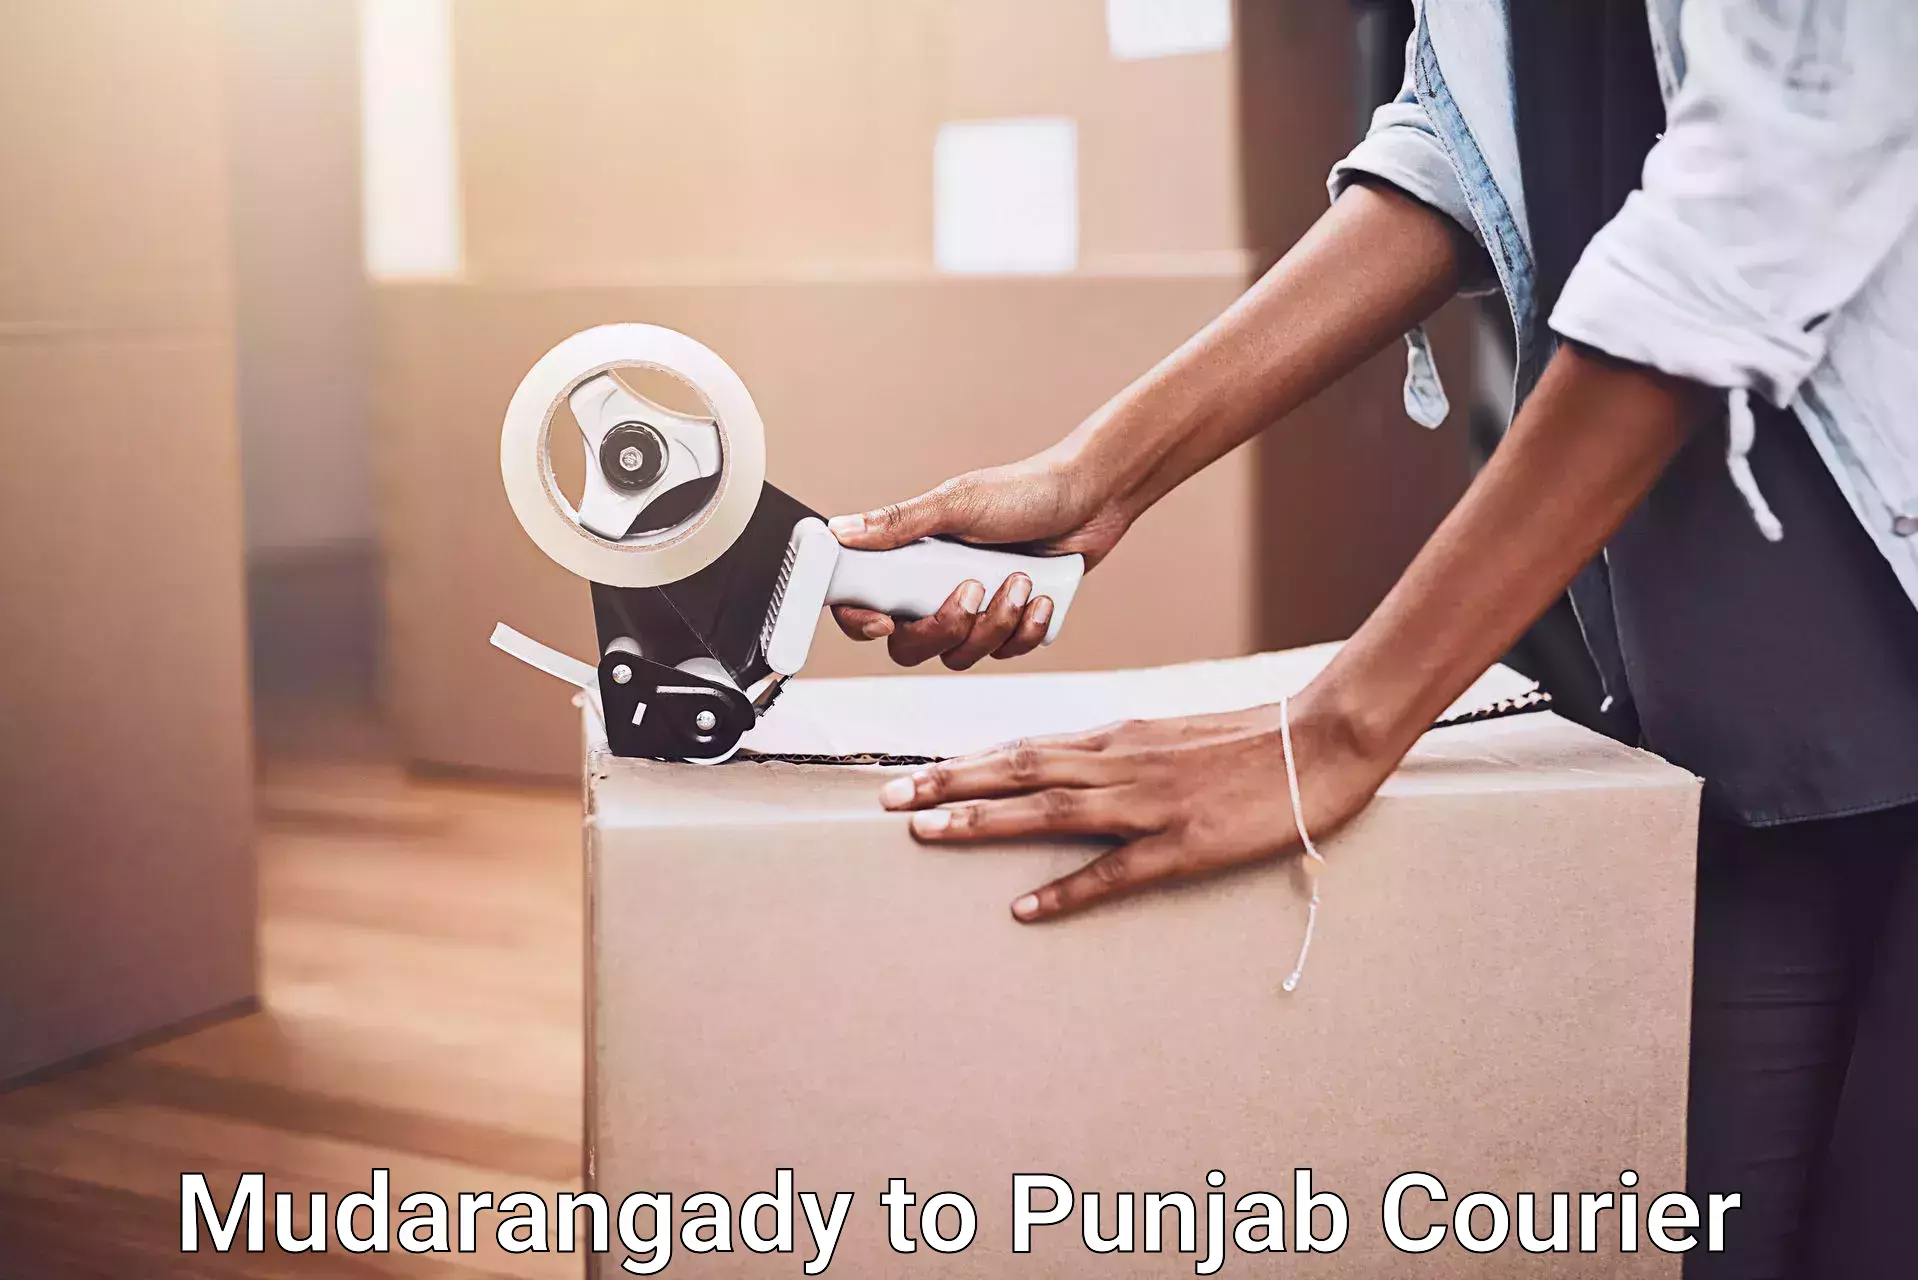 High-quality moving services in Mudarangady to Punjab